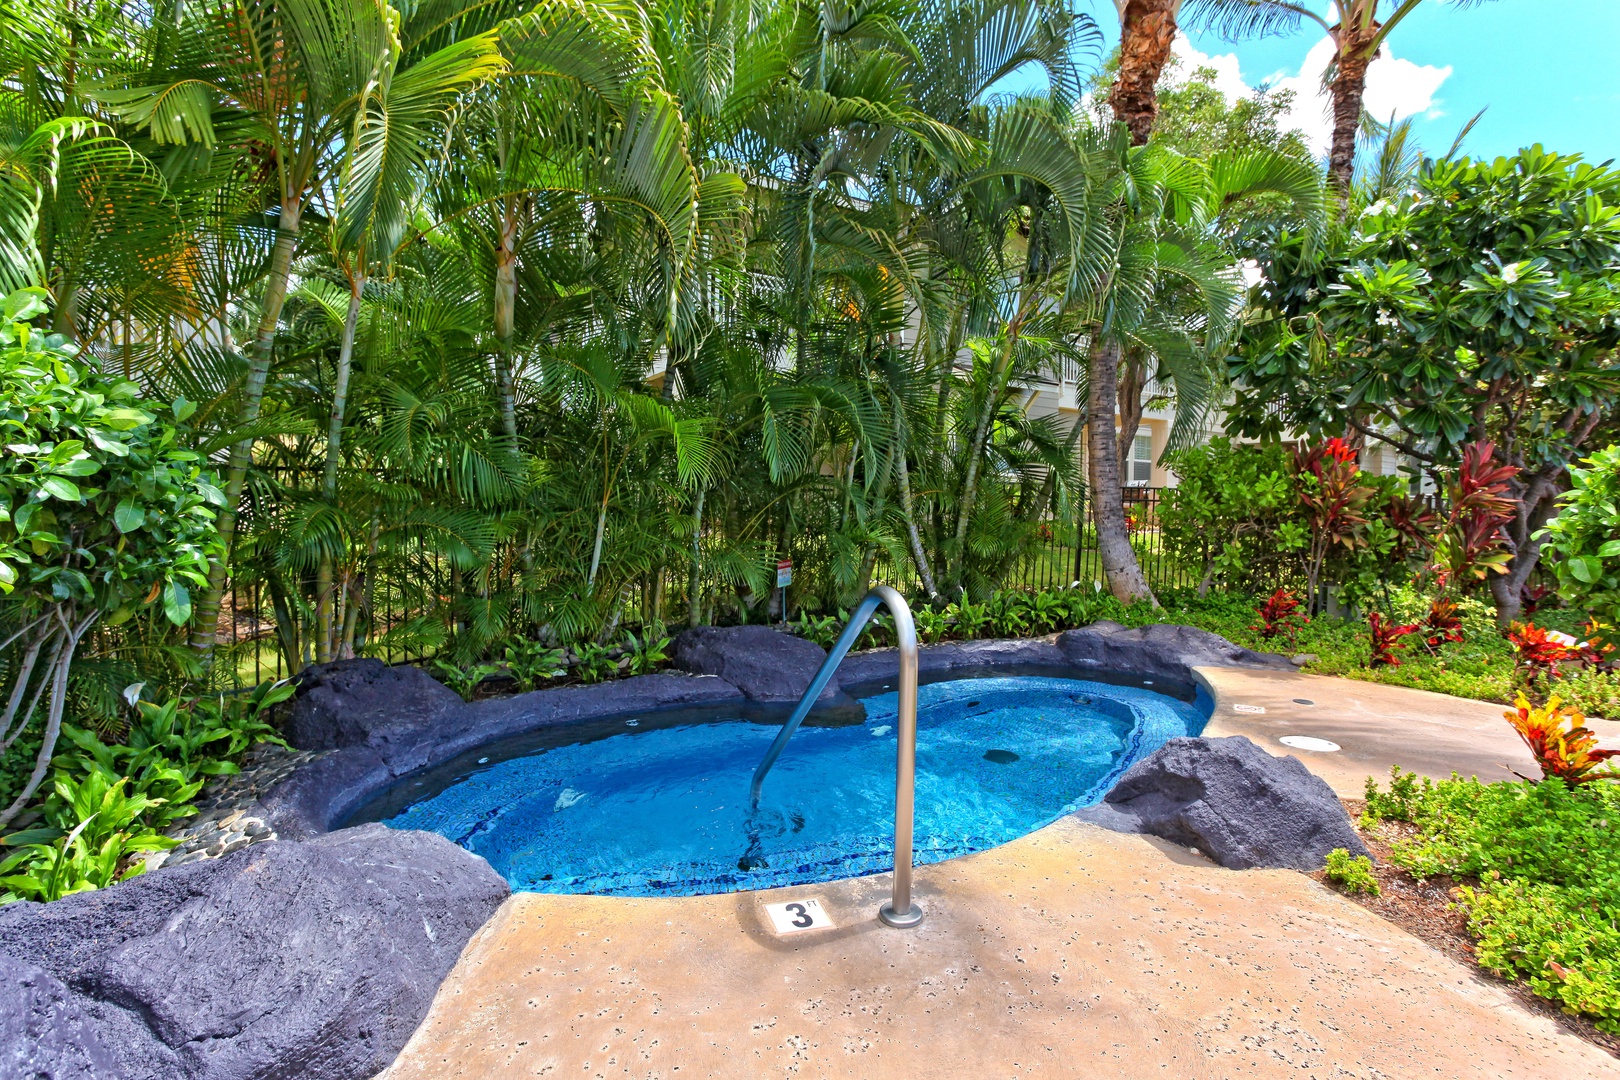 Kapolei Vacation Rentals, Ko Olina Kai 1097C - Outdoor hot tub with a handlebar, and palm trees in the background.